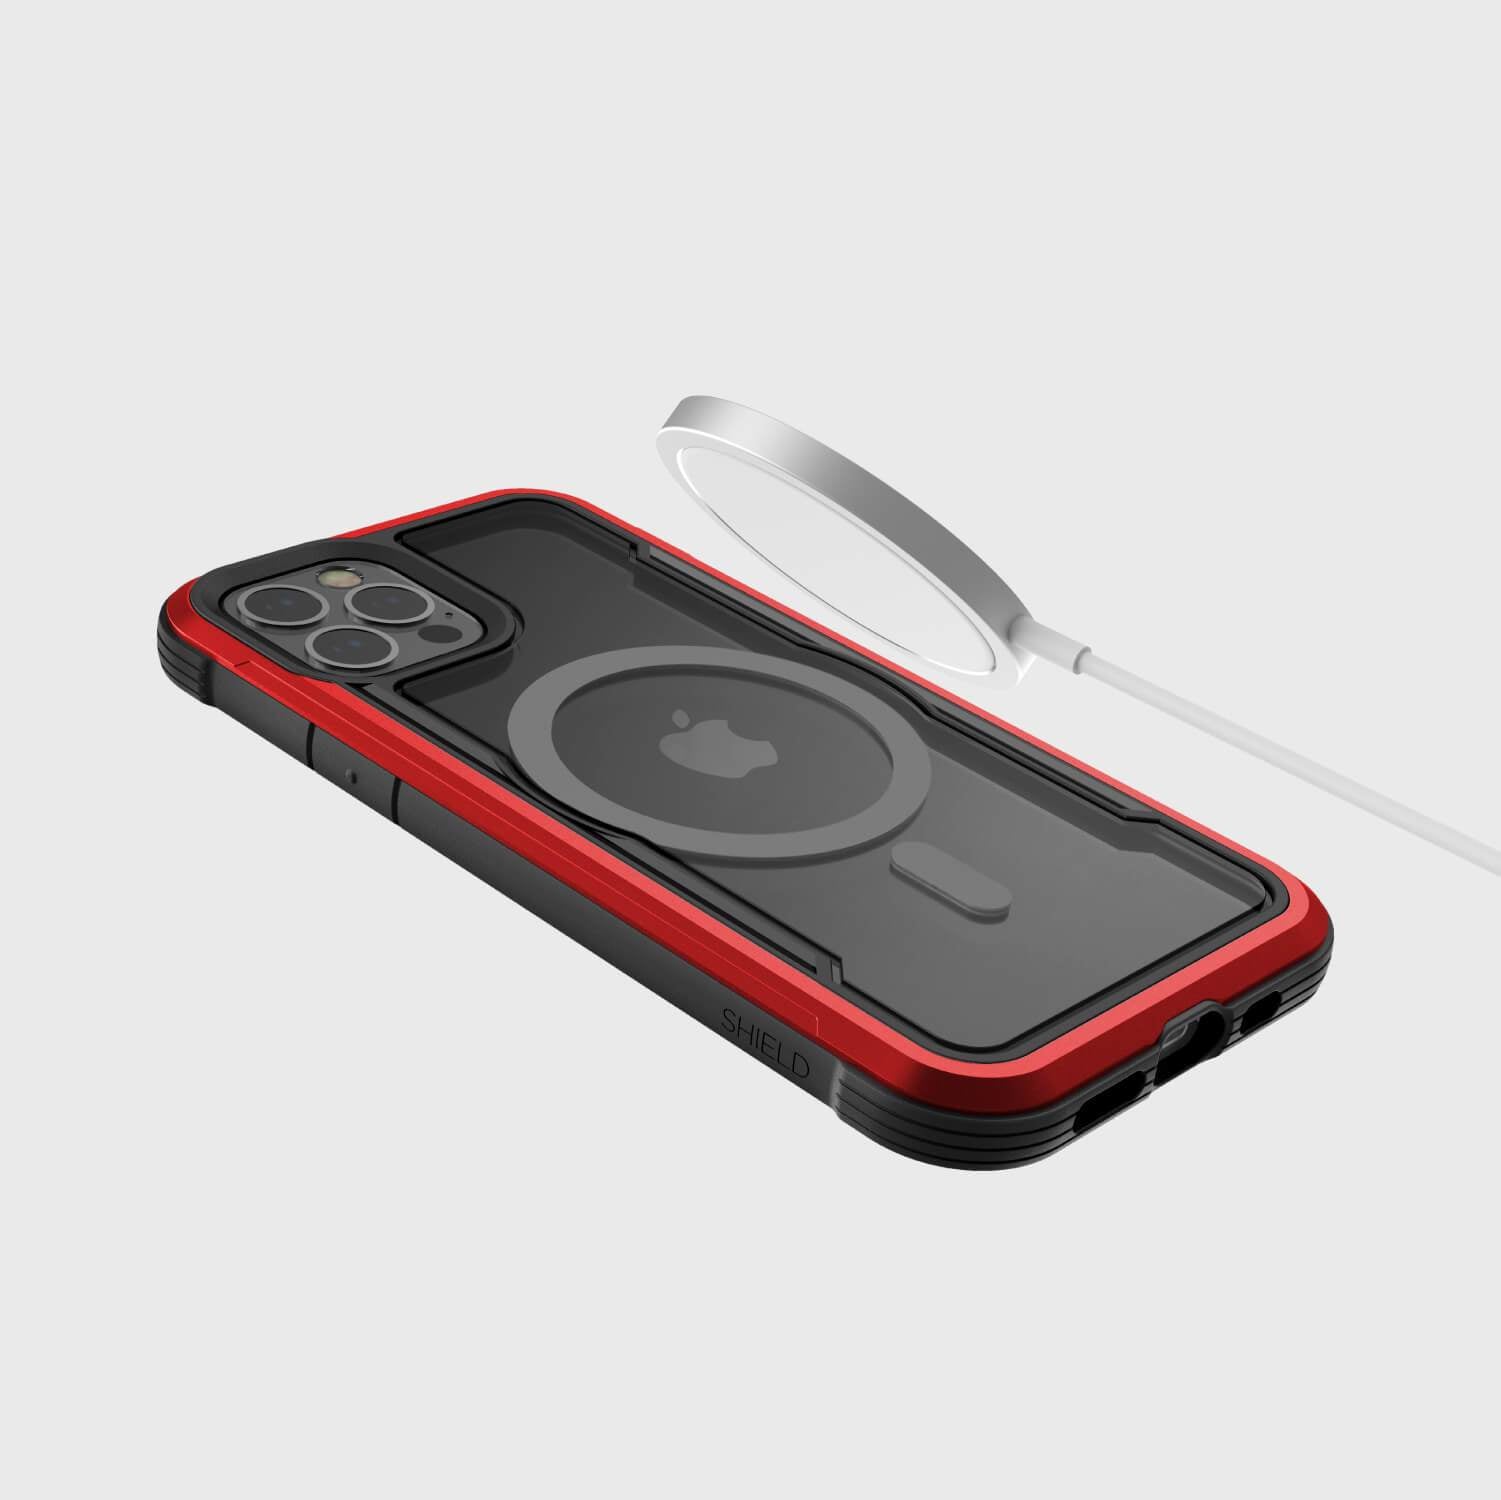 A red iPhone 12 Pro Max case - SHIELD PRO MAGNET by Raptic with a phone holder and MagSafe charger attached.